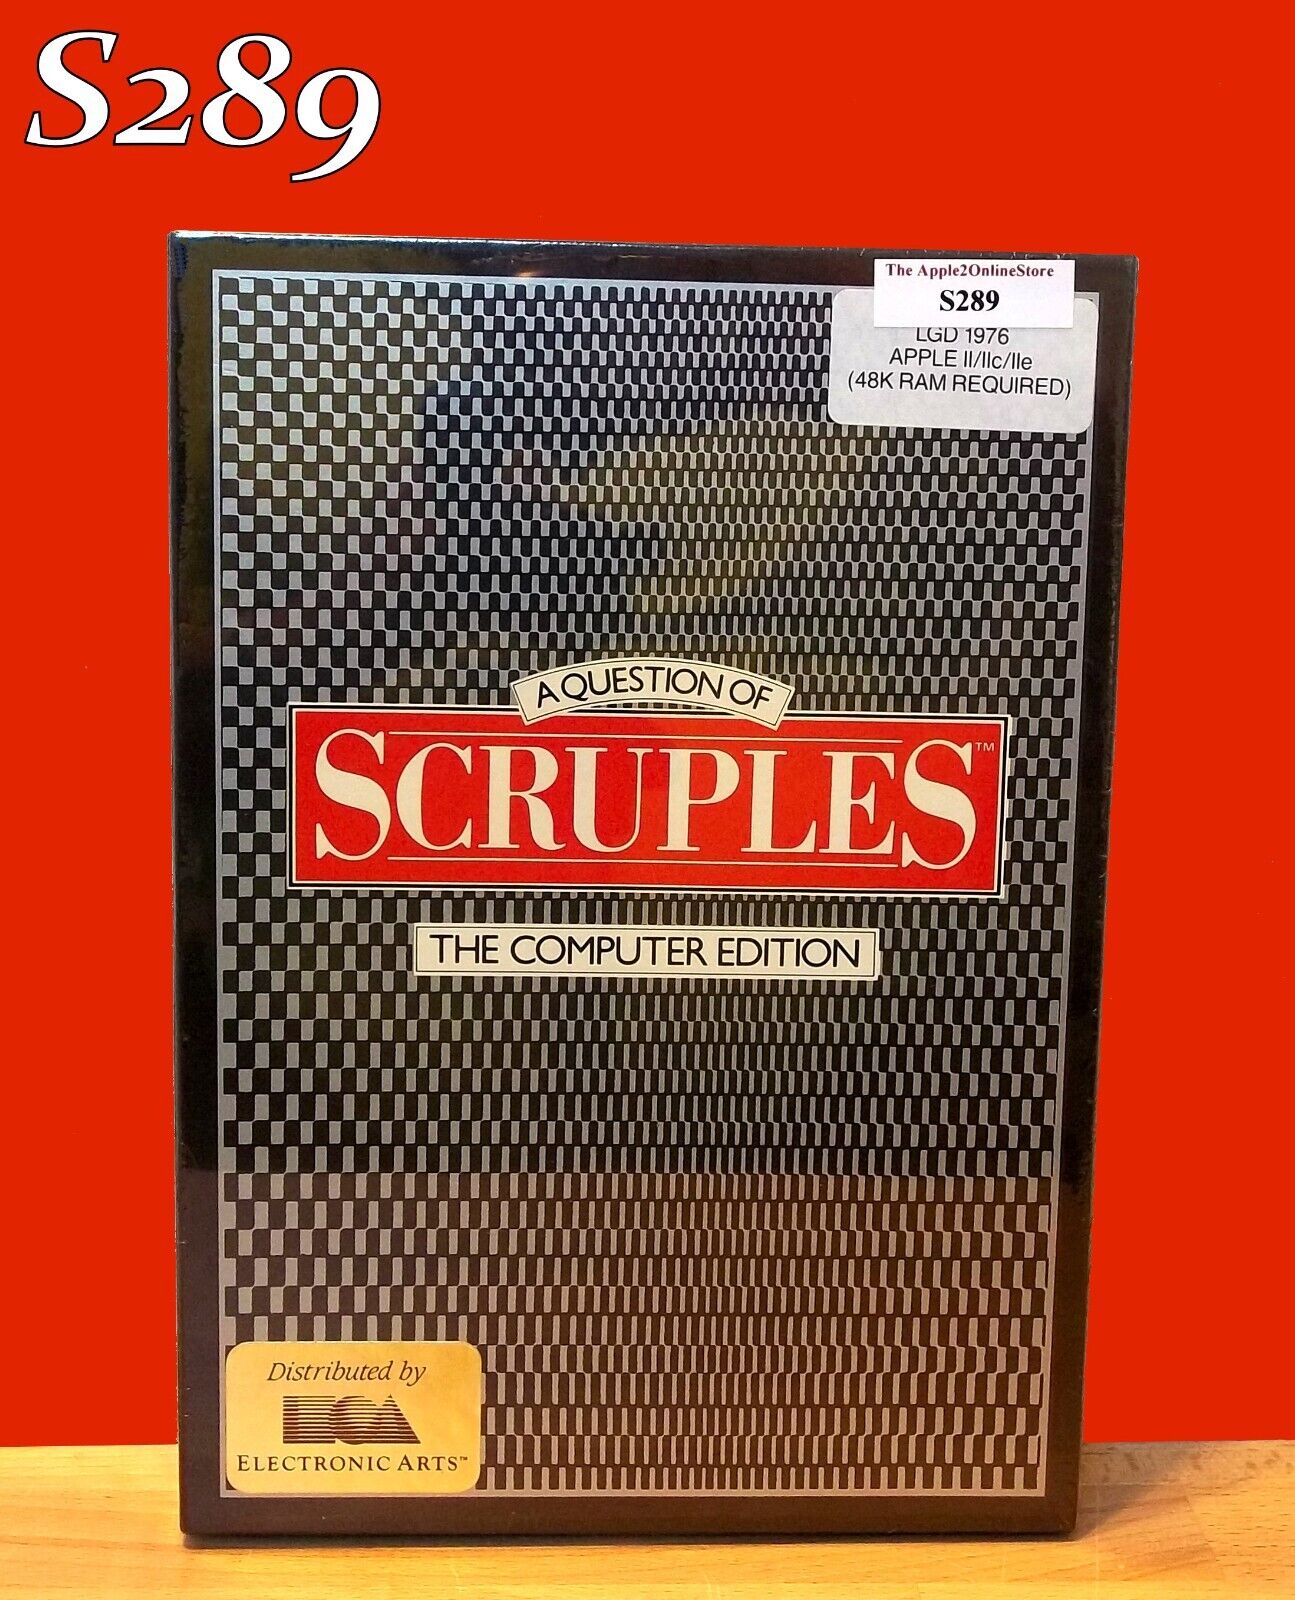 ✅ 🍎 A Question of Scruples is an Adult Conversation Game for the Apple II